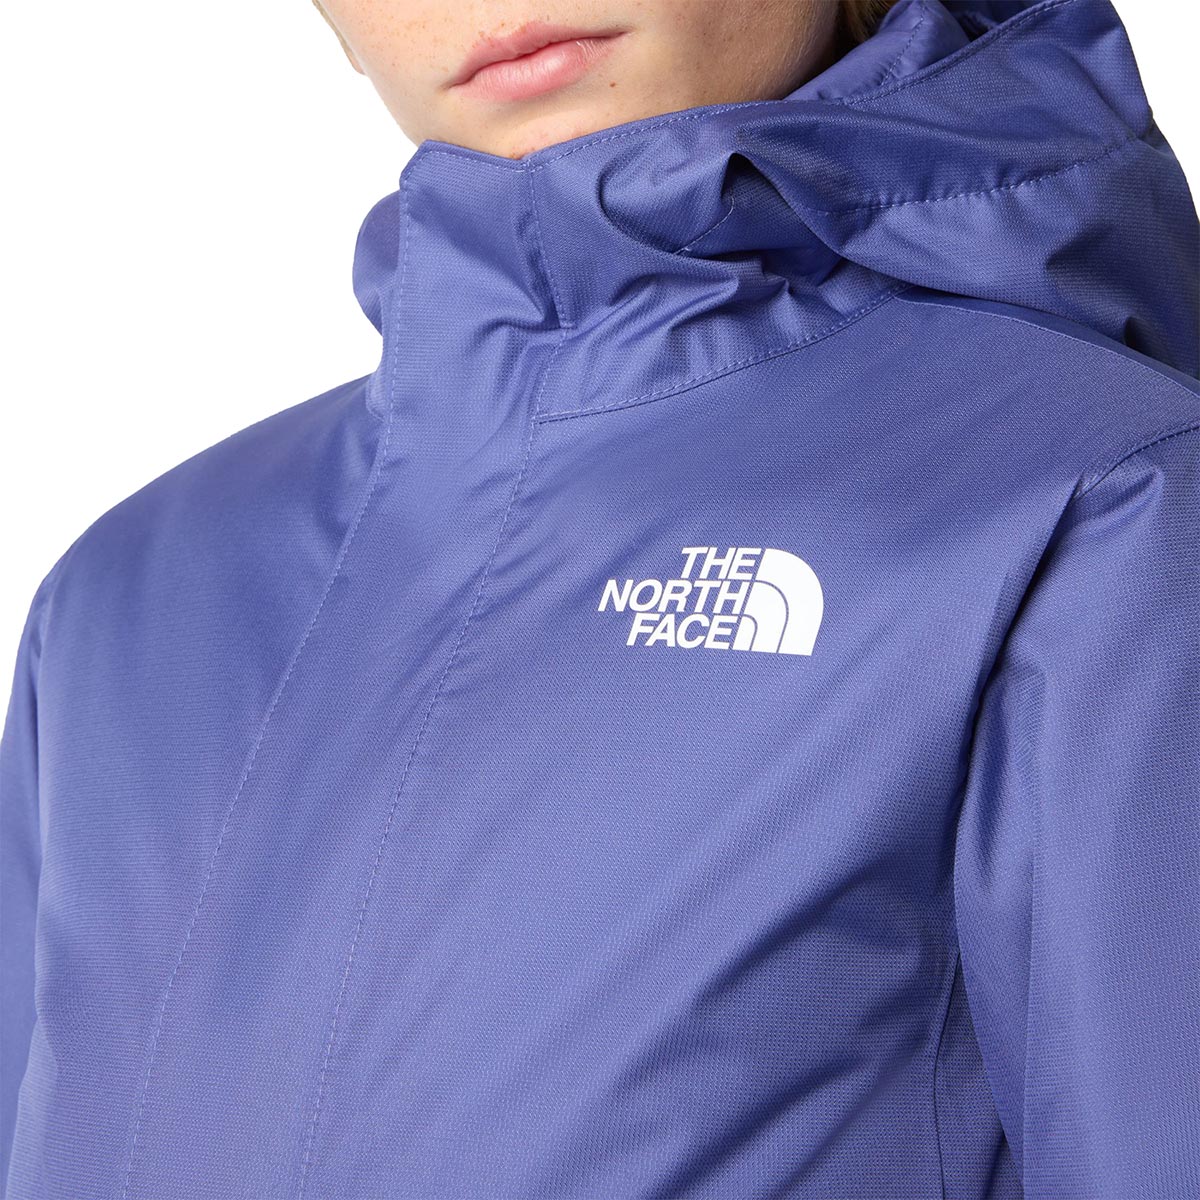 THE NORTH FACE - TEENS SNOWQUEST JACKET